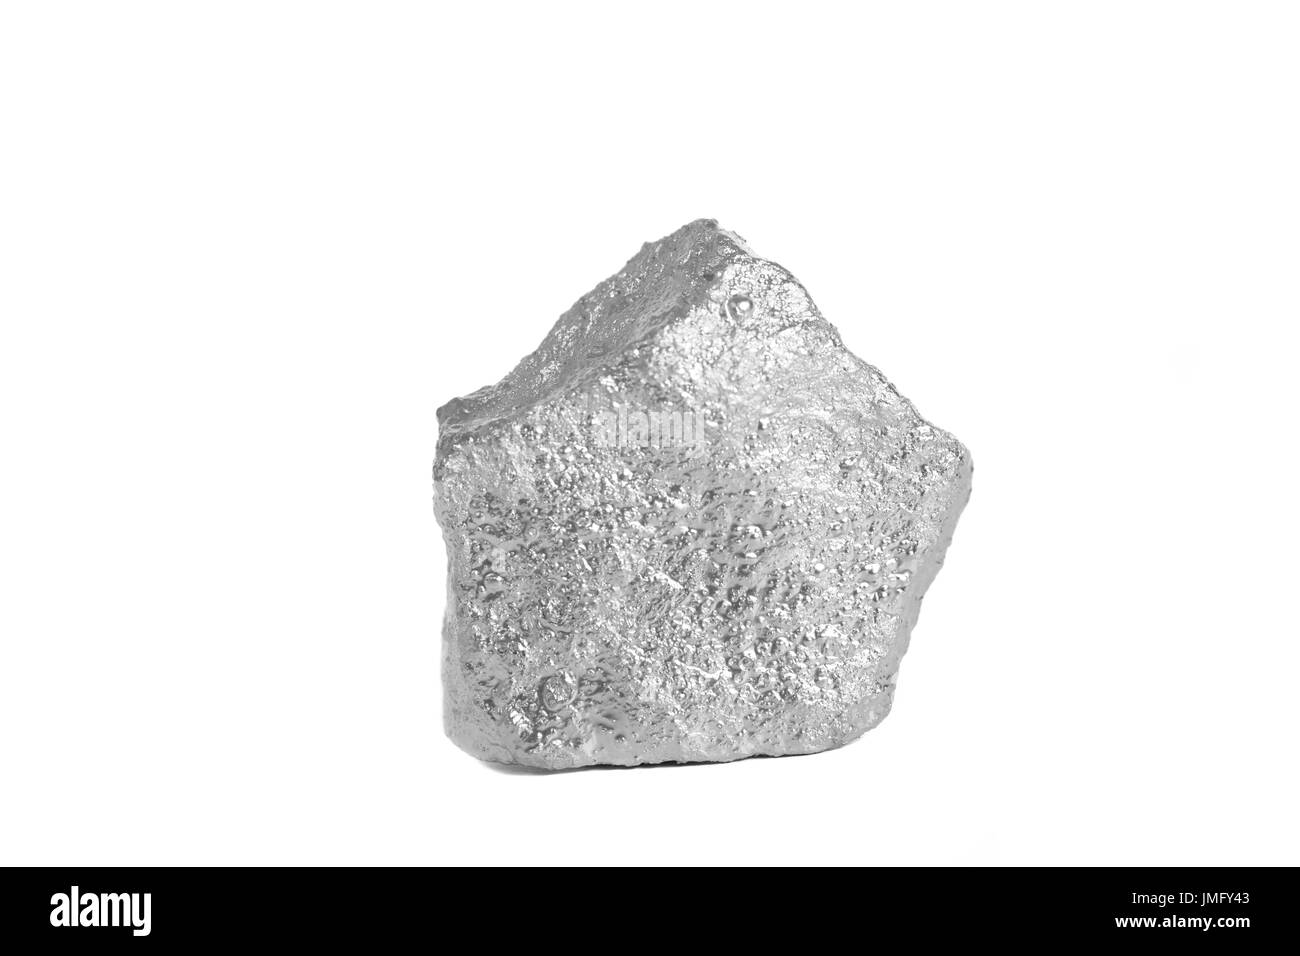 Silver nugget isolated on white background Stock Photo